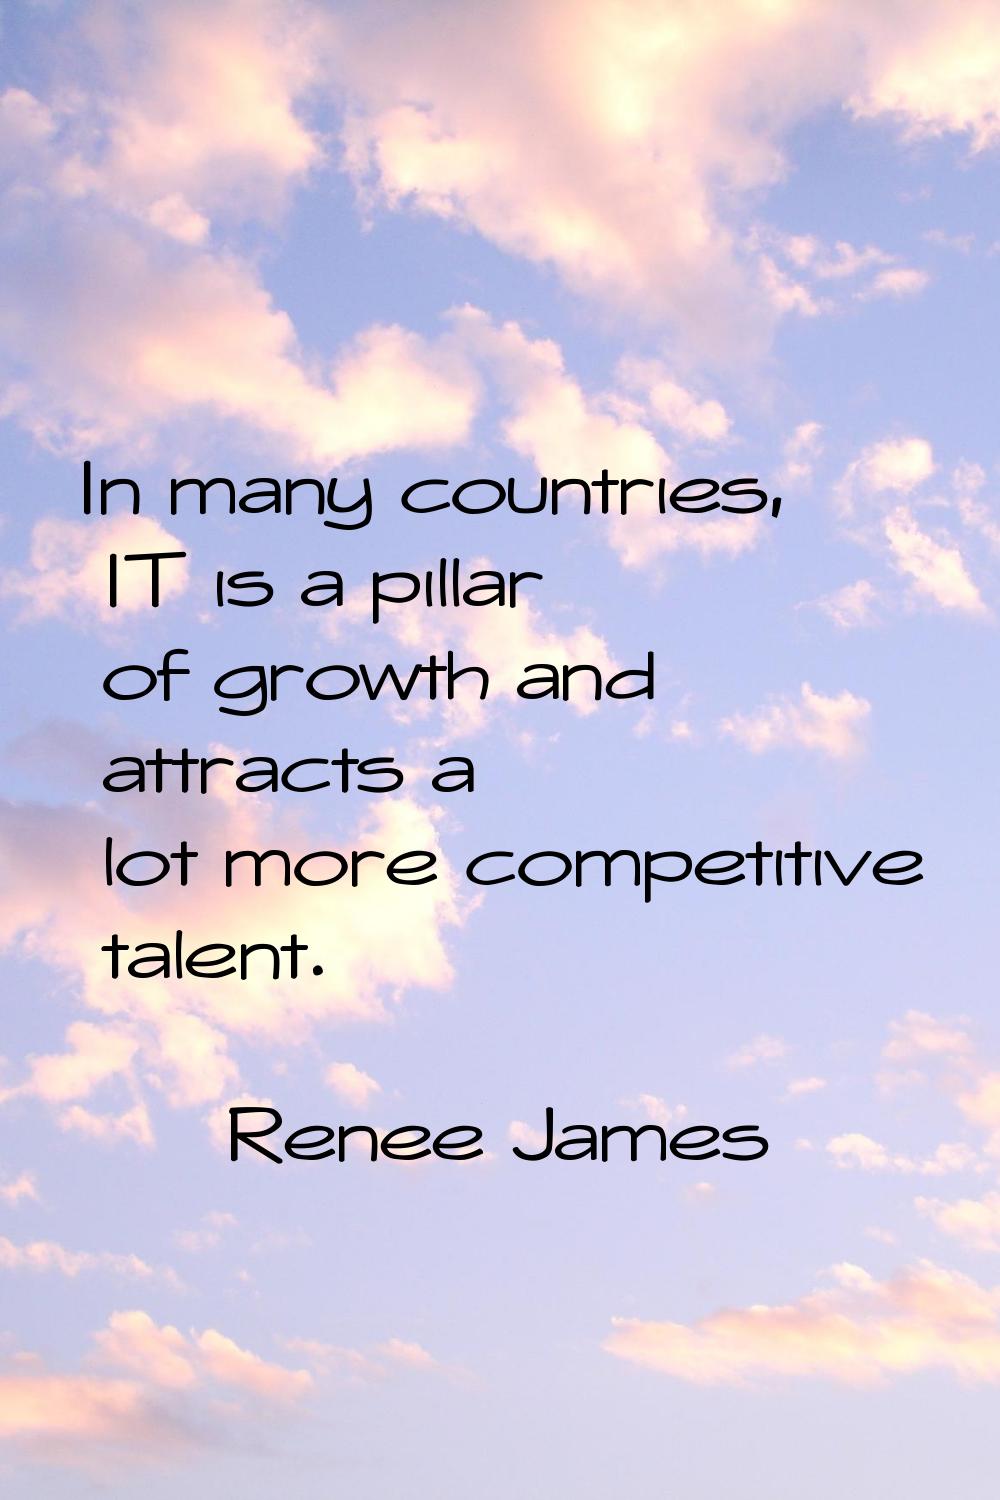 In many countries, IT is a pillar of growth and attracts a lot more competitive talent.